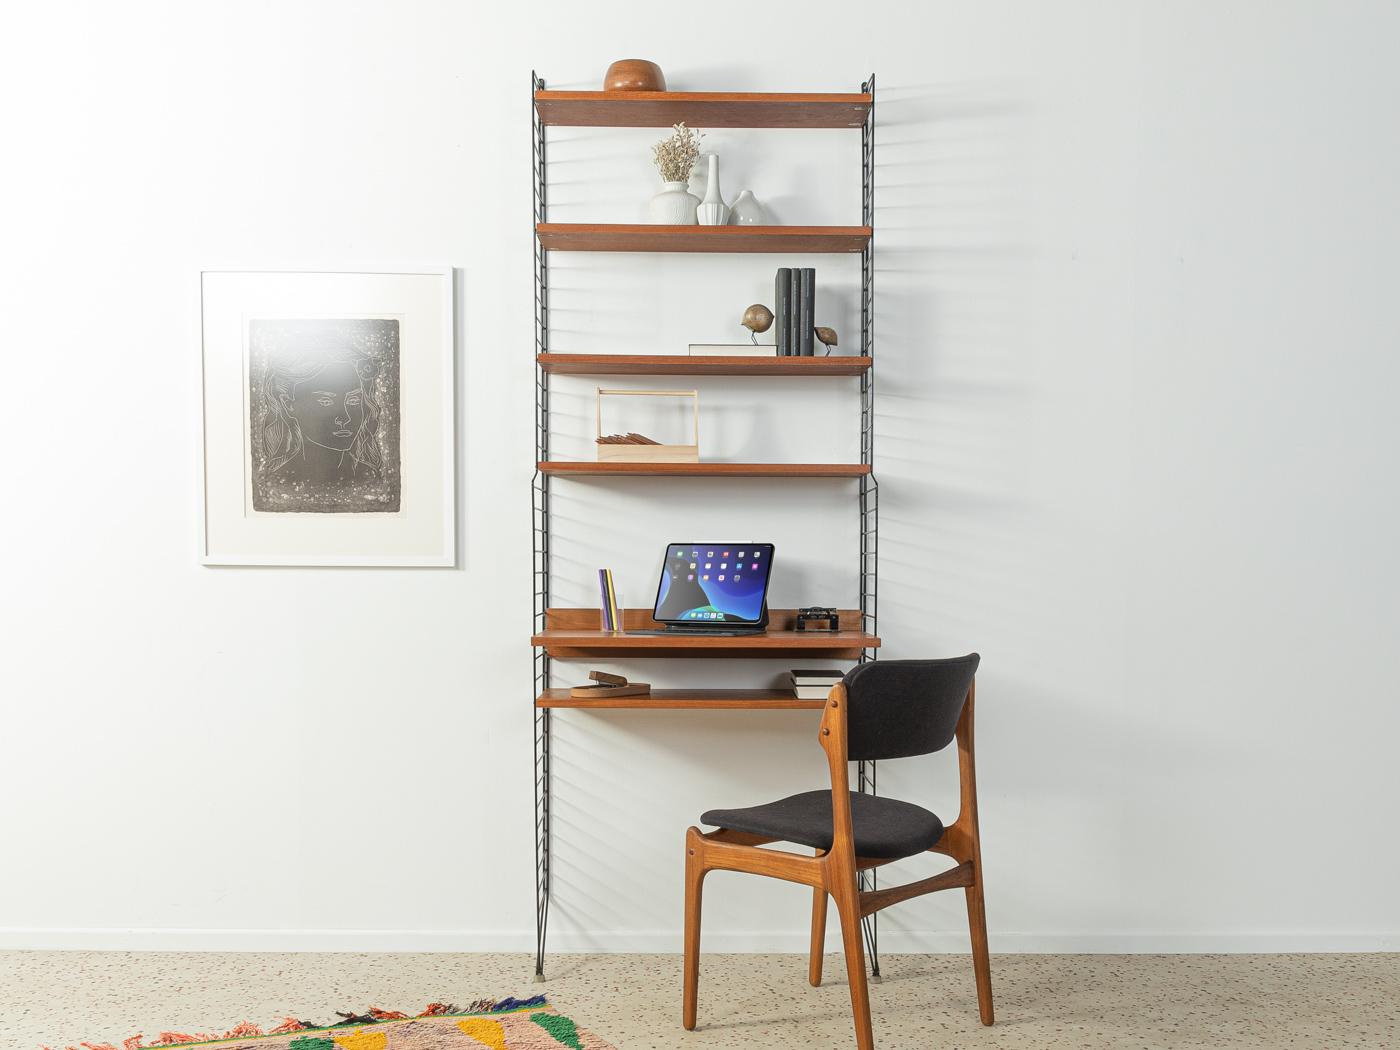 Original String shelf designed in 1949 by Nils Strinning in teak veneer. The system consists of two metal ladders in black with four small shelves, one large shelve and a bureau compartment.

This original String shelf is much better processed and